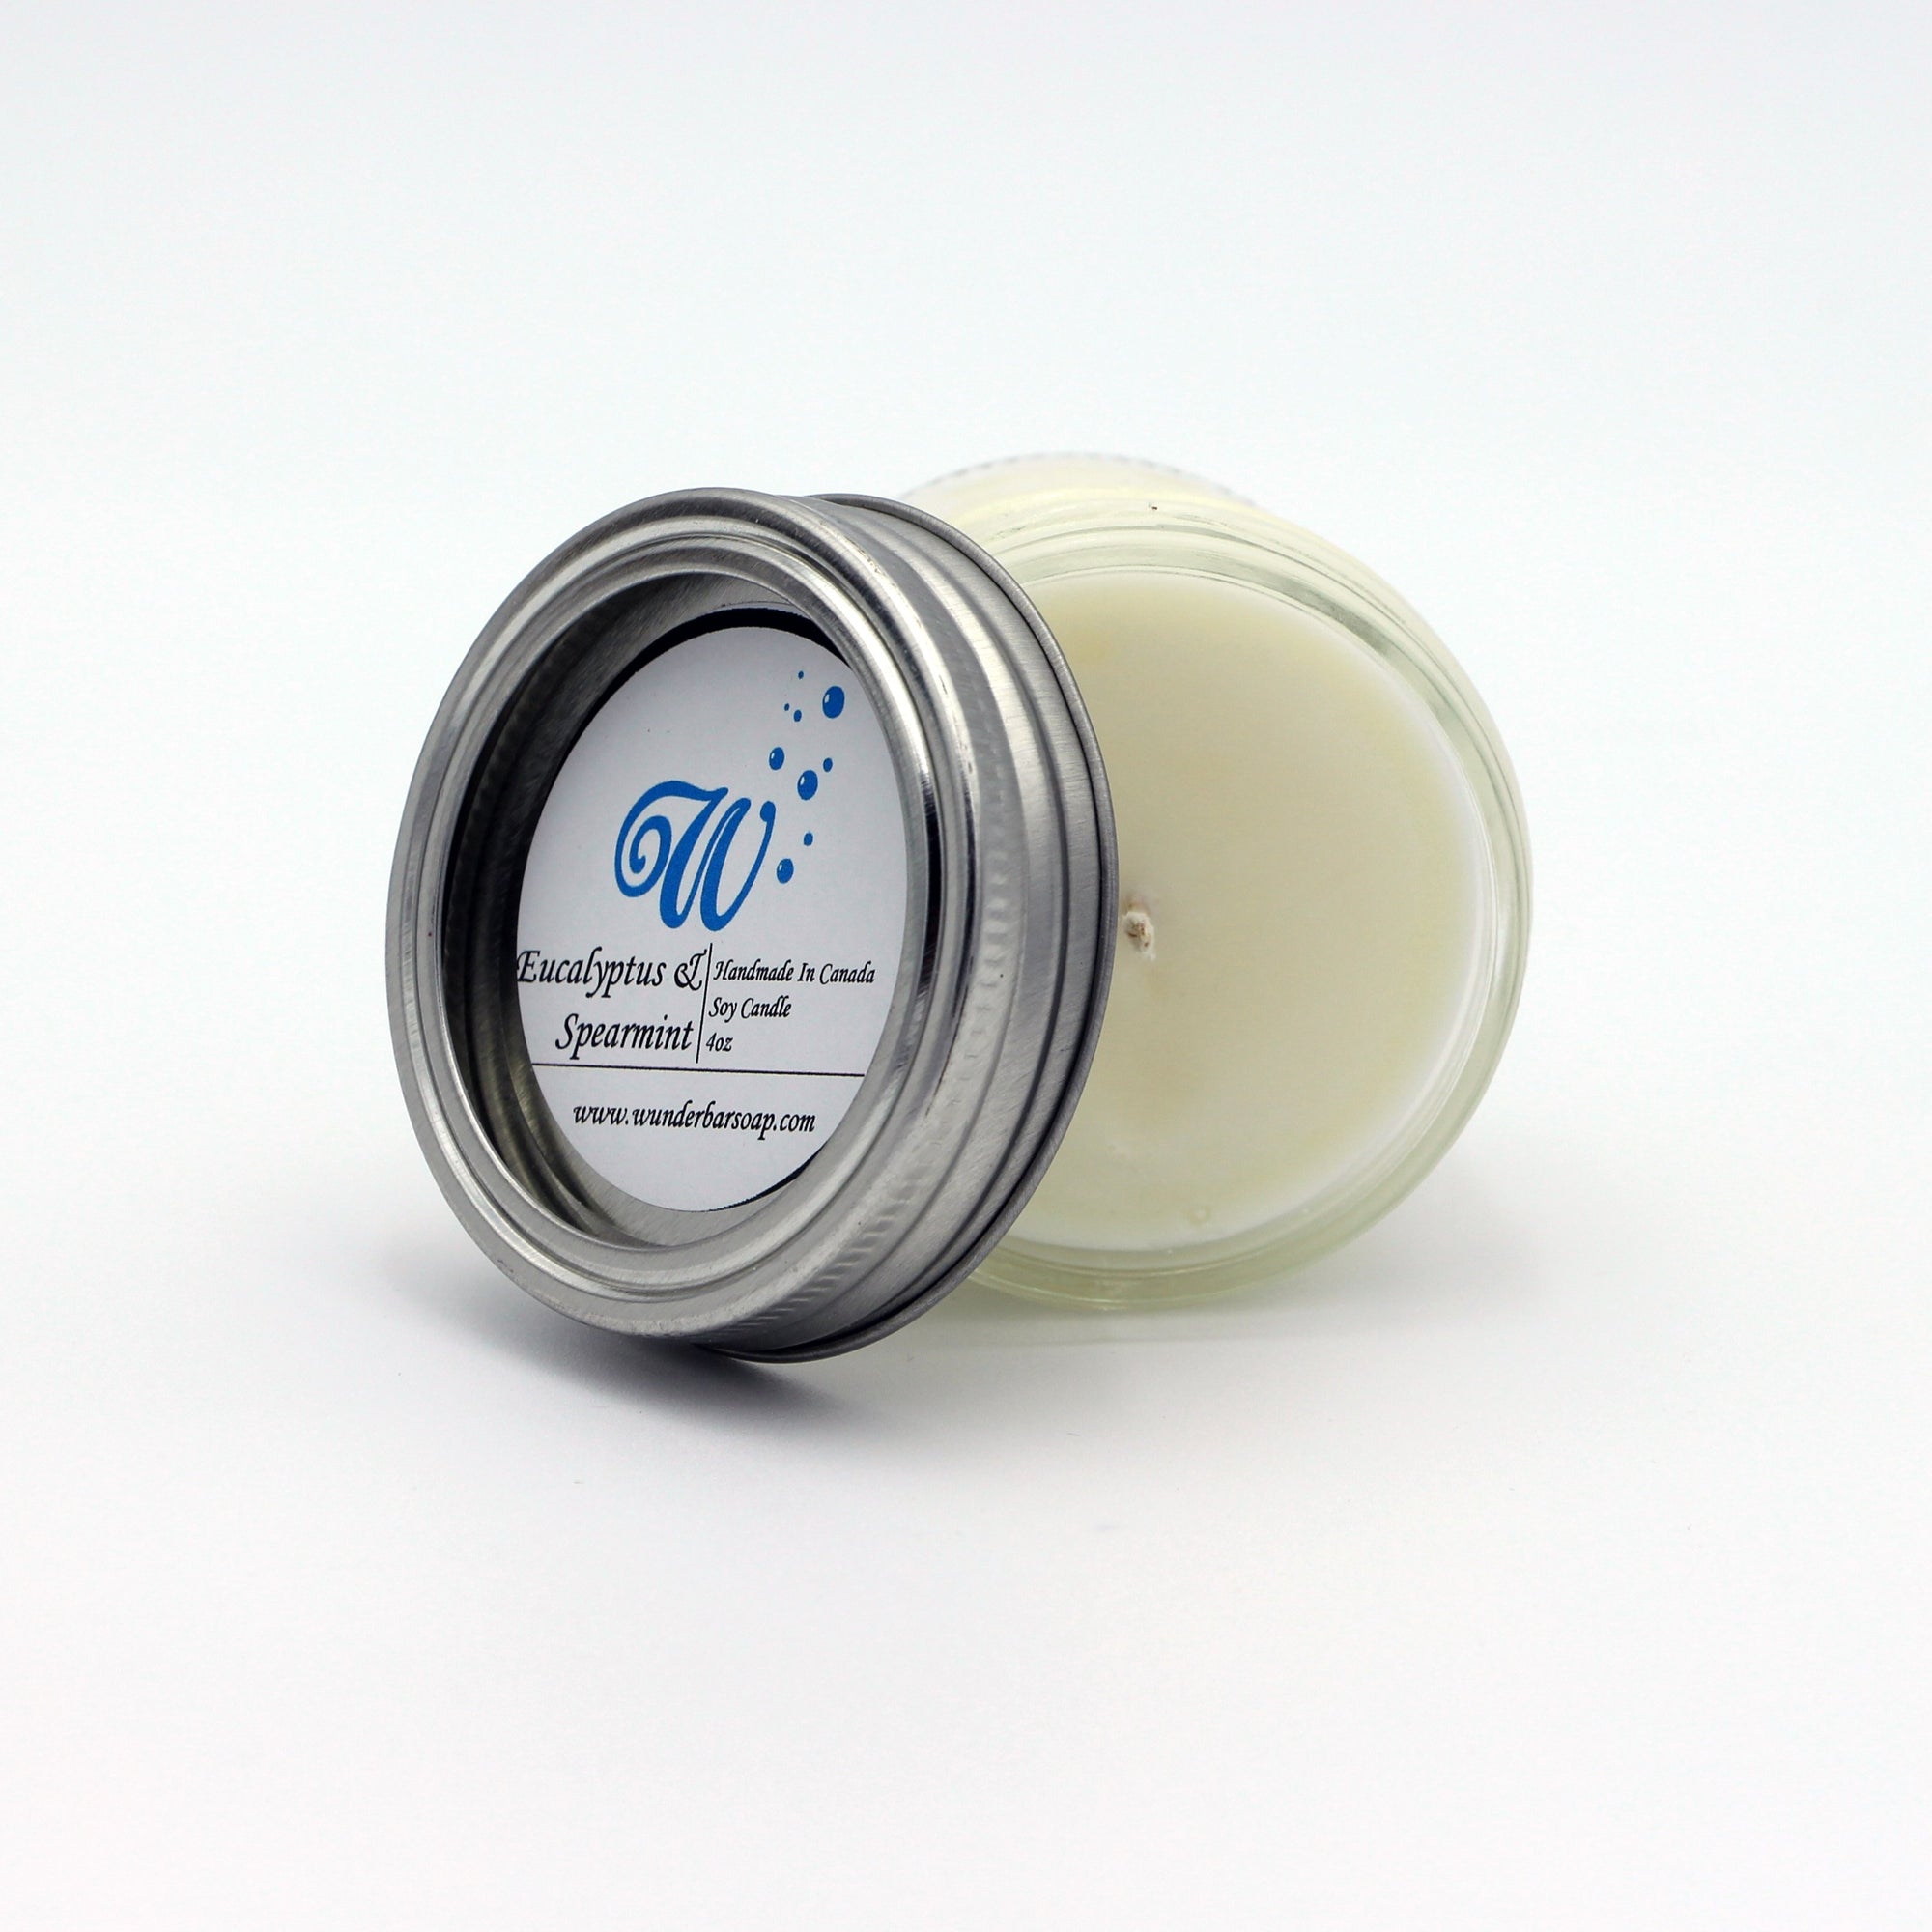 soy candles canada, soy candles ontario, handmade candles, handmade soy candles, men's candles, man candles, eucalyptus candles, spearmint candle, environmentally friendly candles, refreshing candles, 